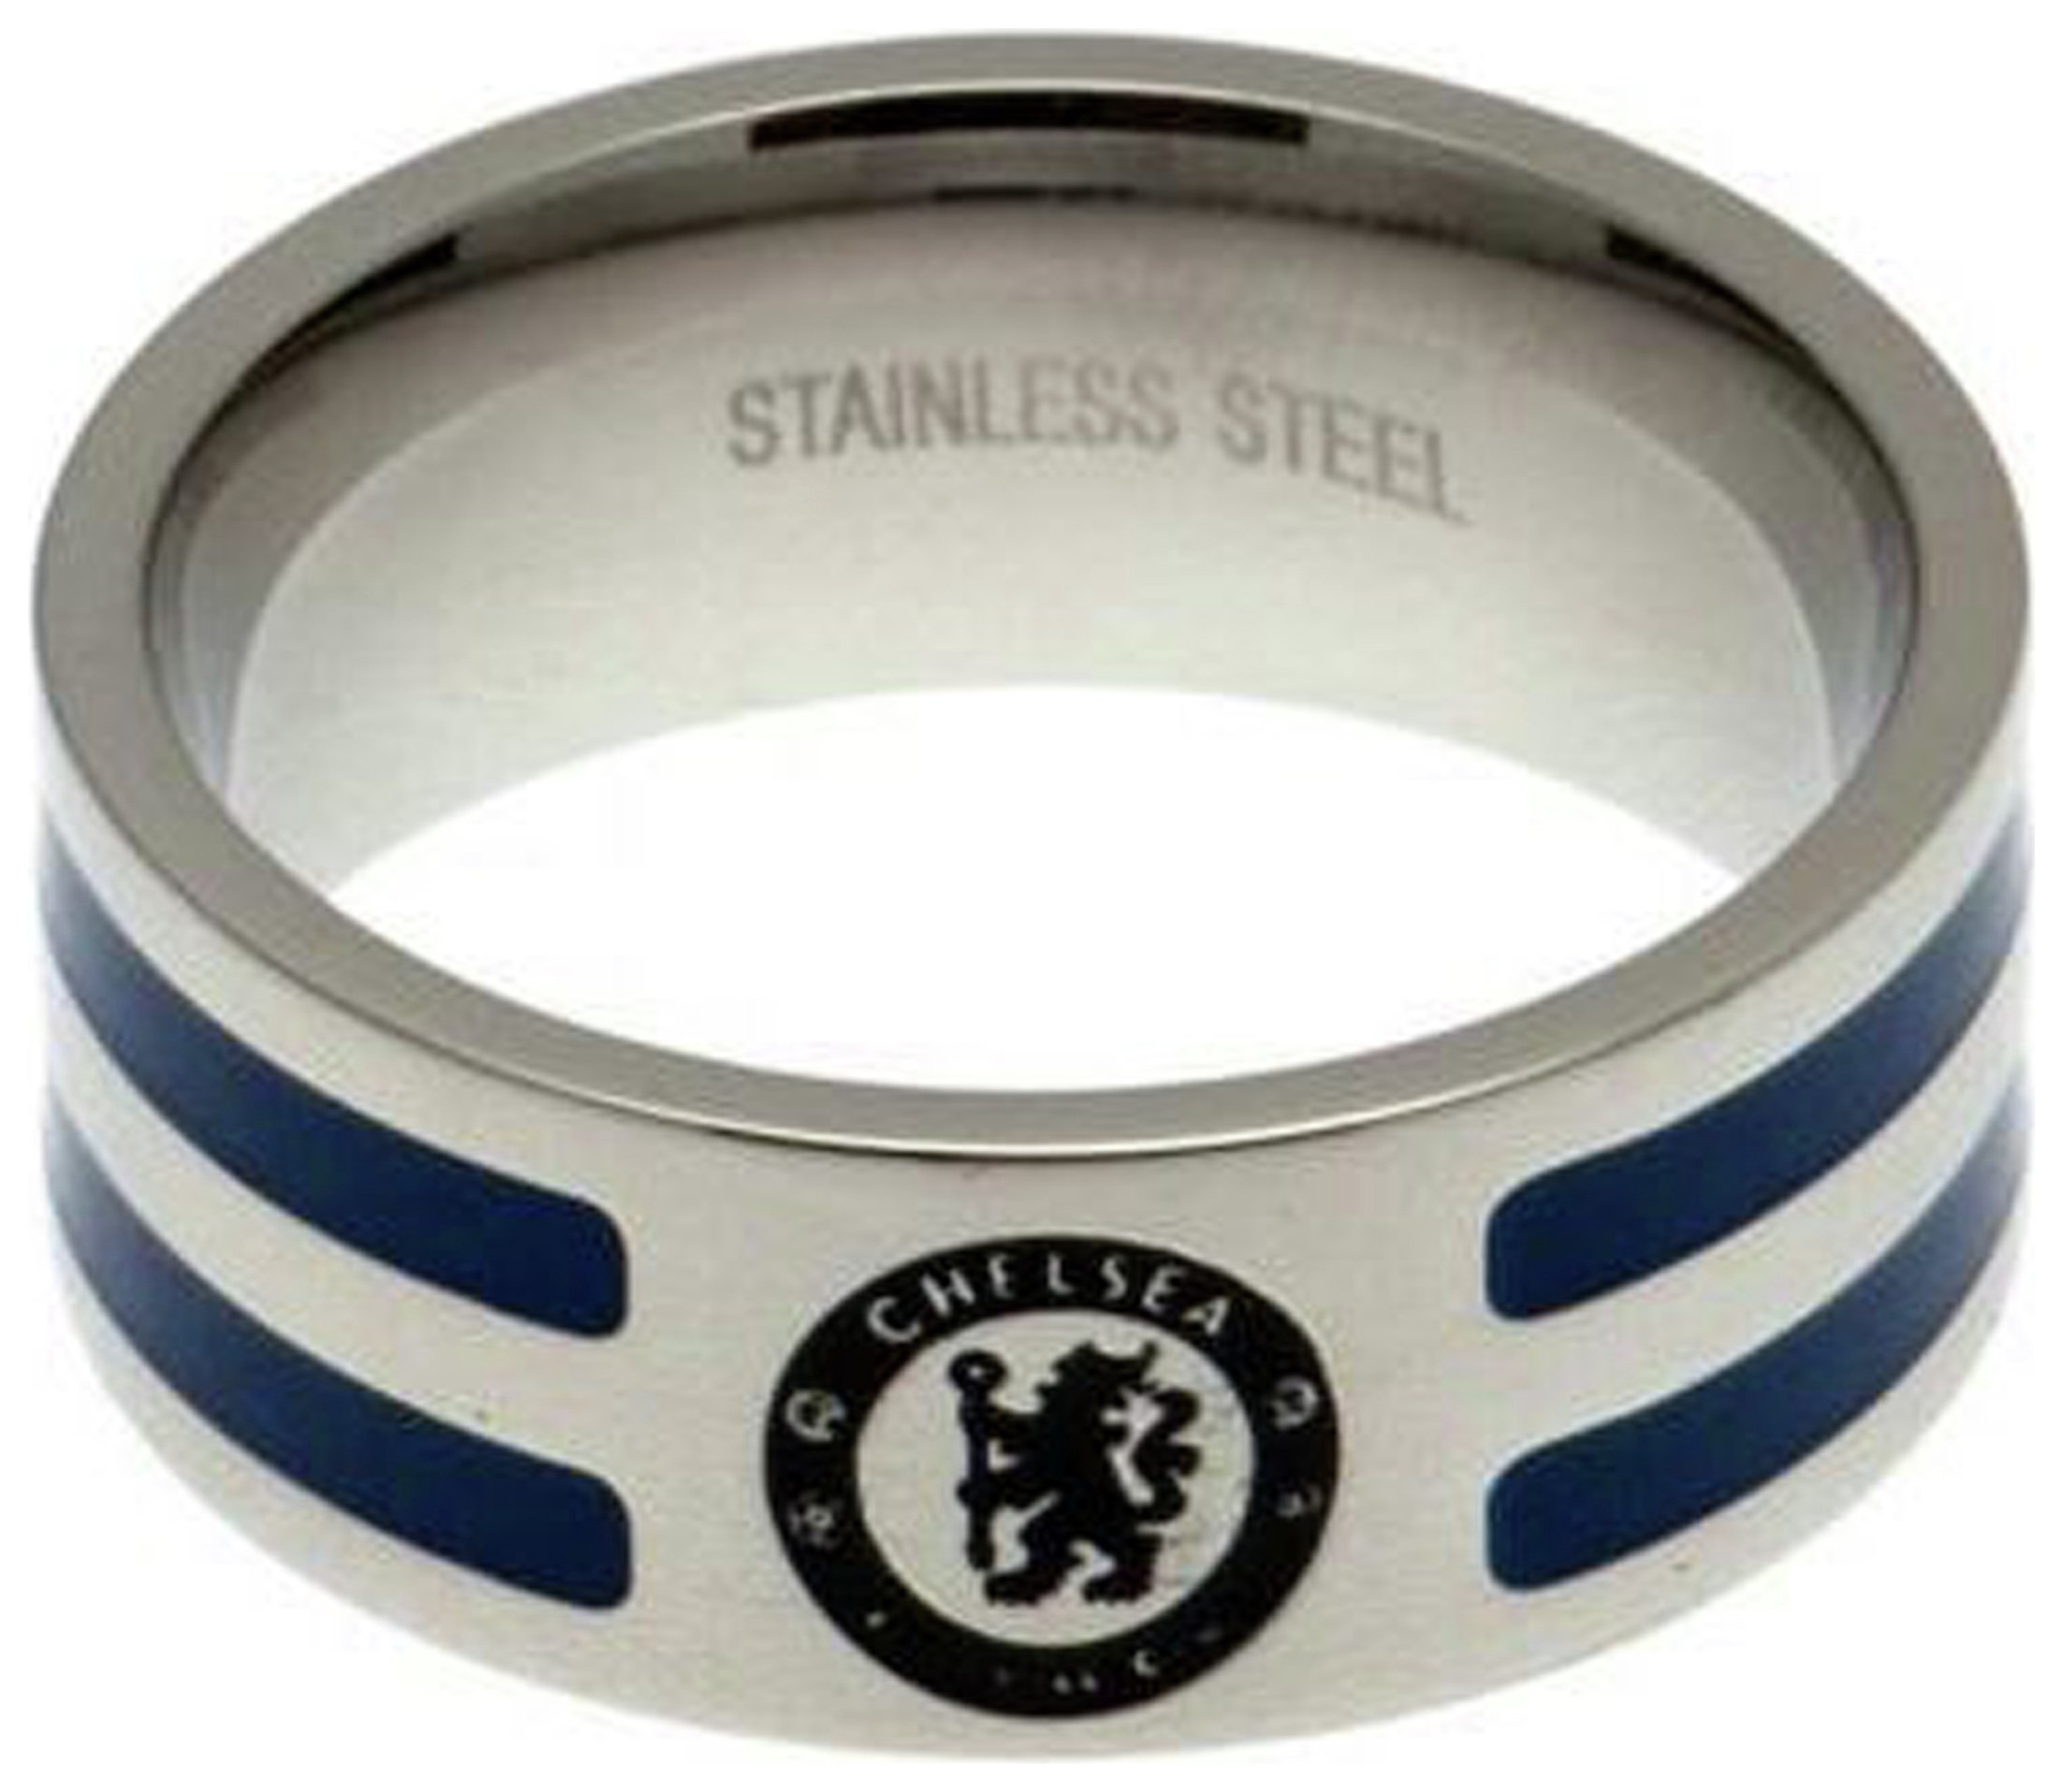 Stainless Steel Chelsea Striped Ring - Size U.